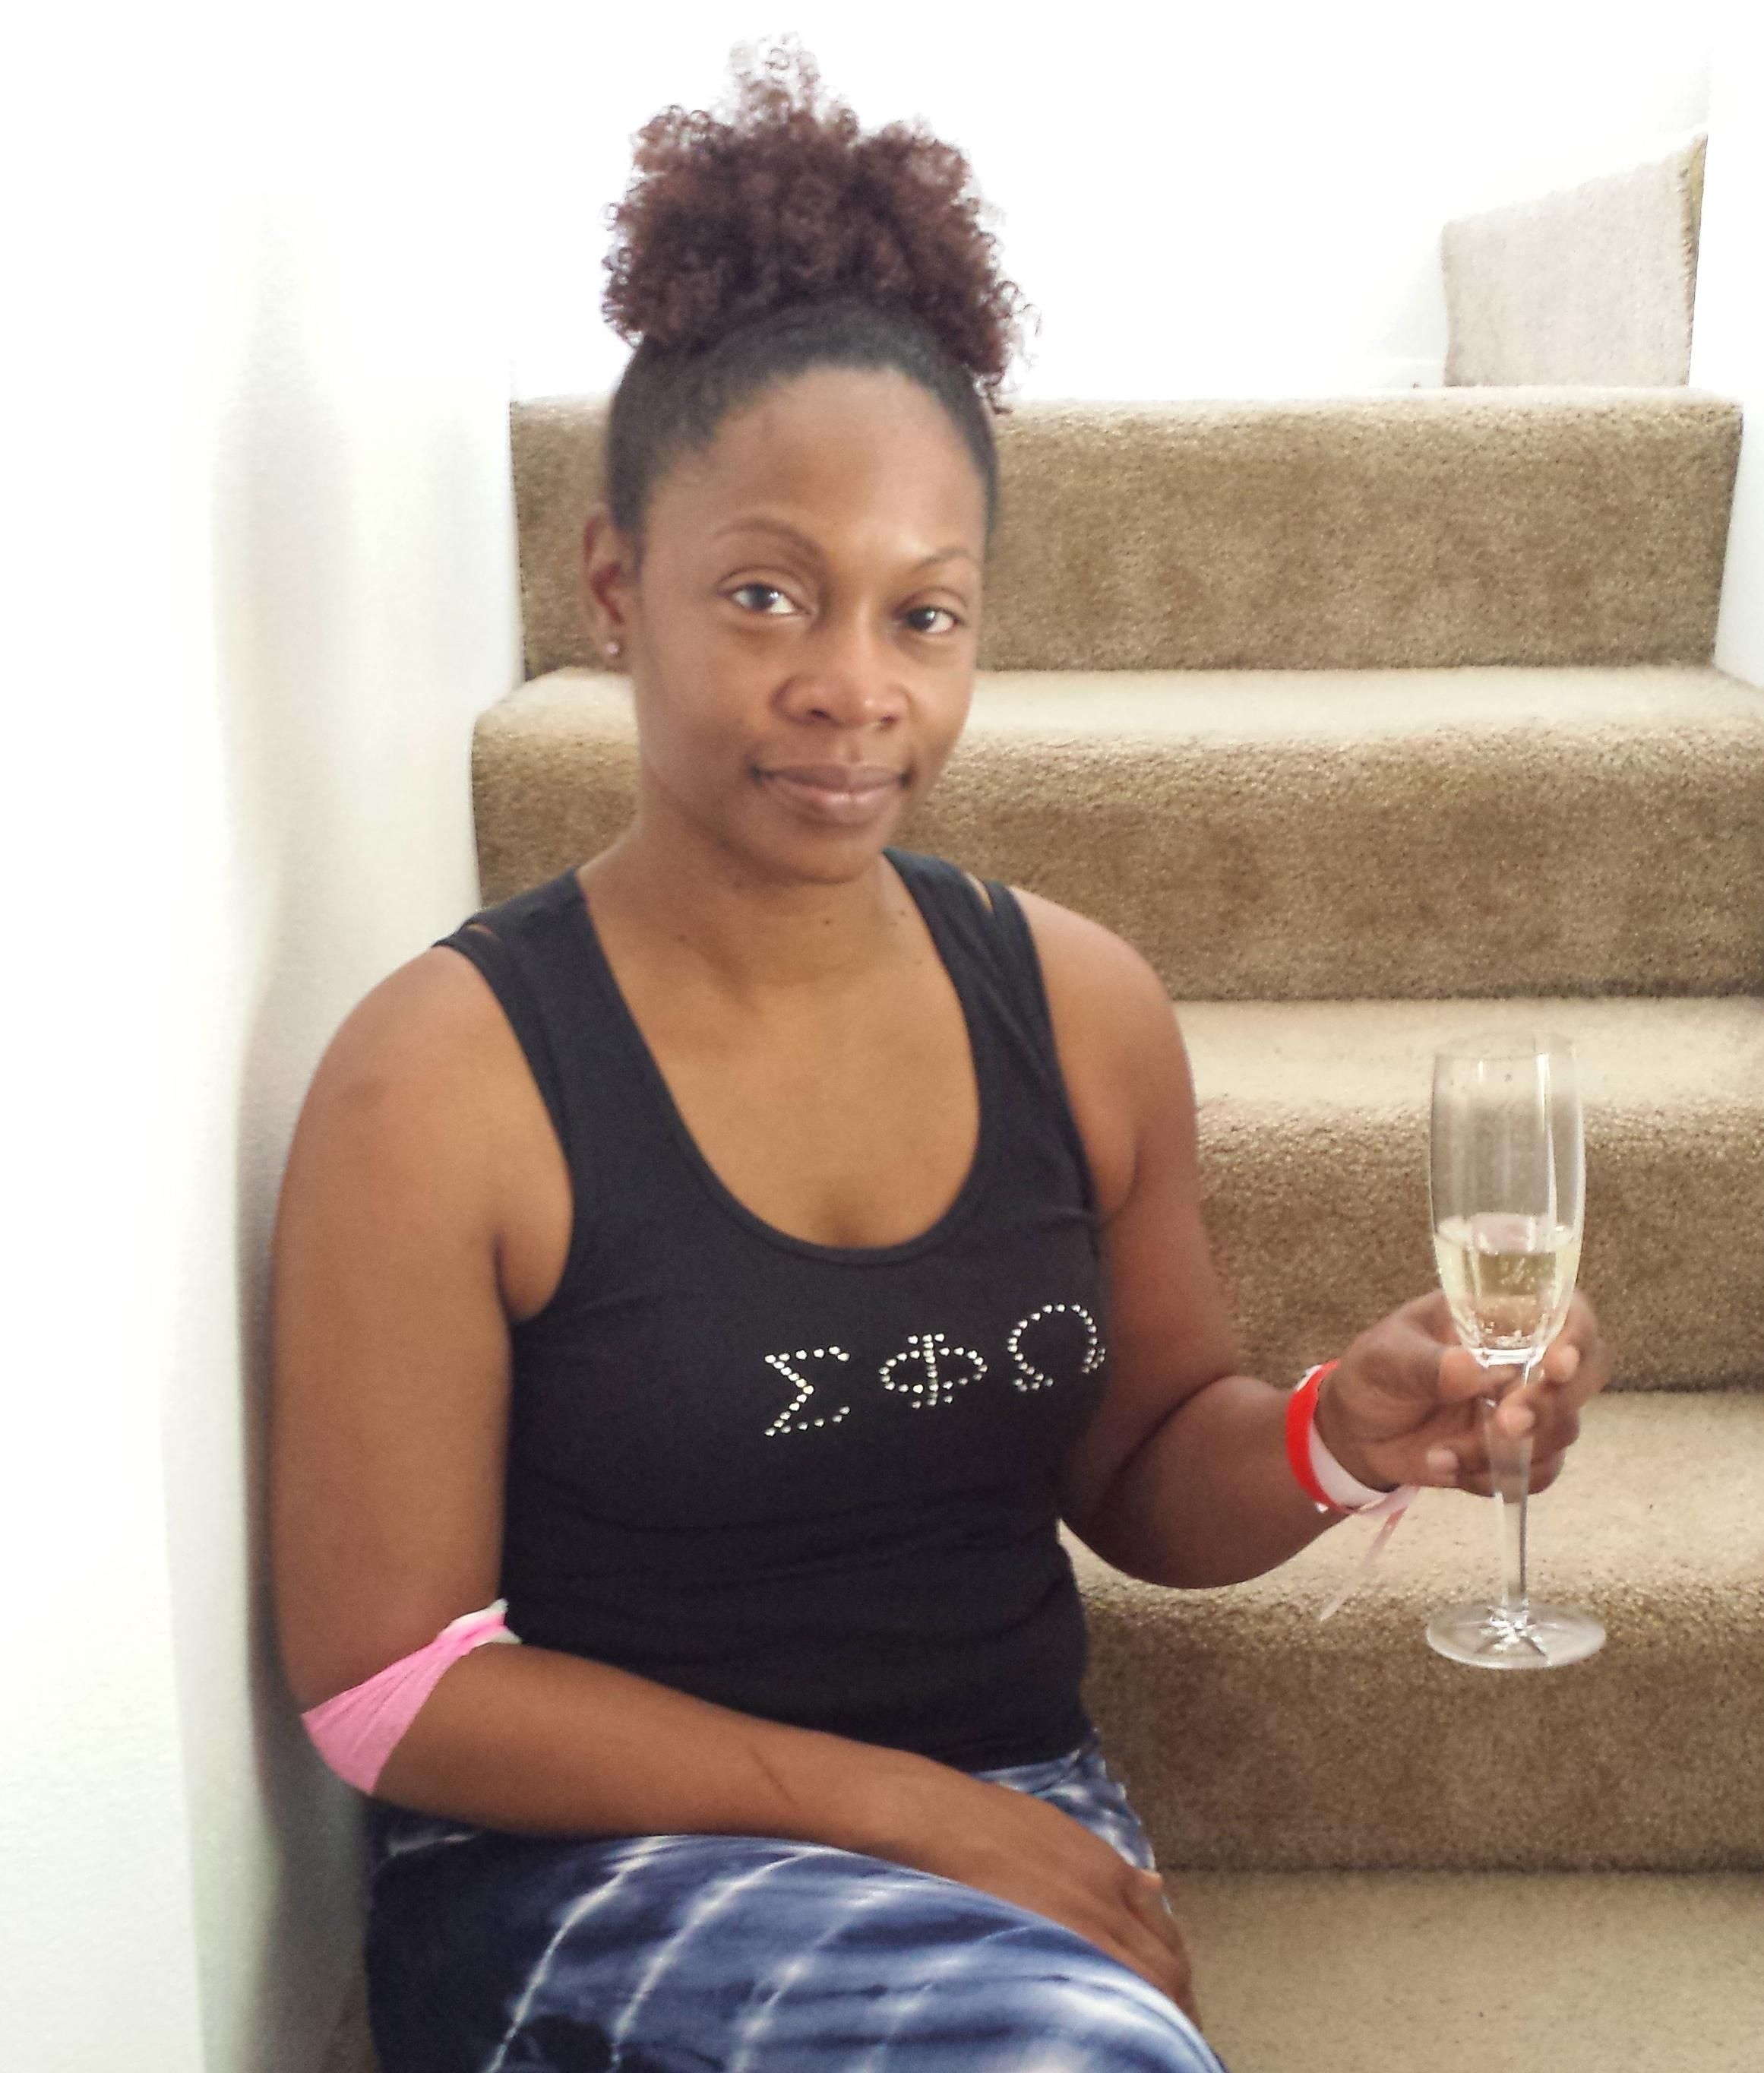 Kimberly with her champagne, celebrating \u201ckicking cancer\u2019s butt\u201d after her diagnosis, July 24, 2015.